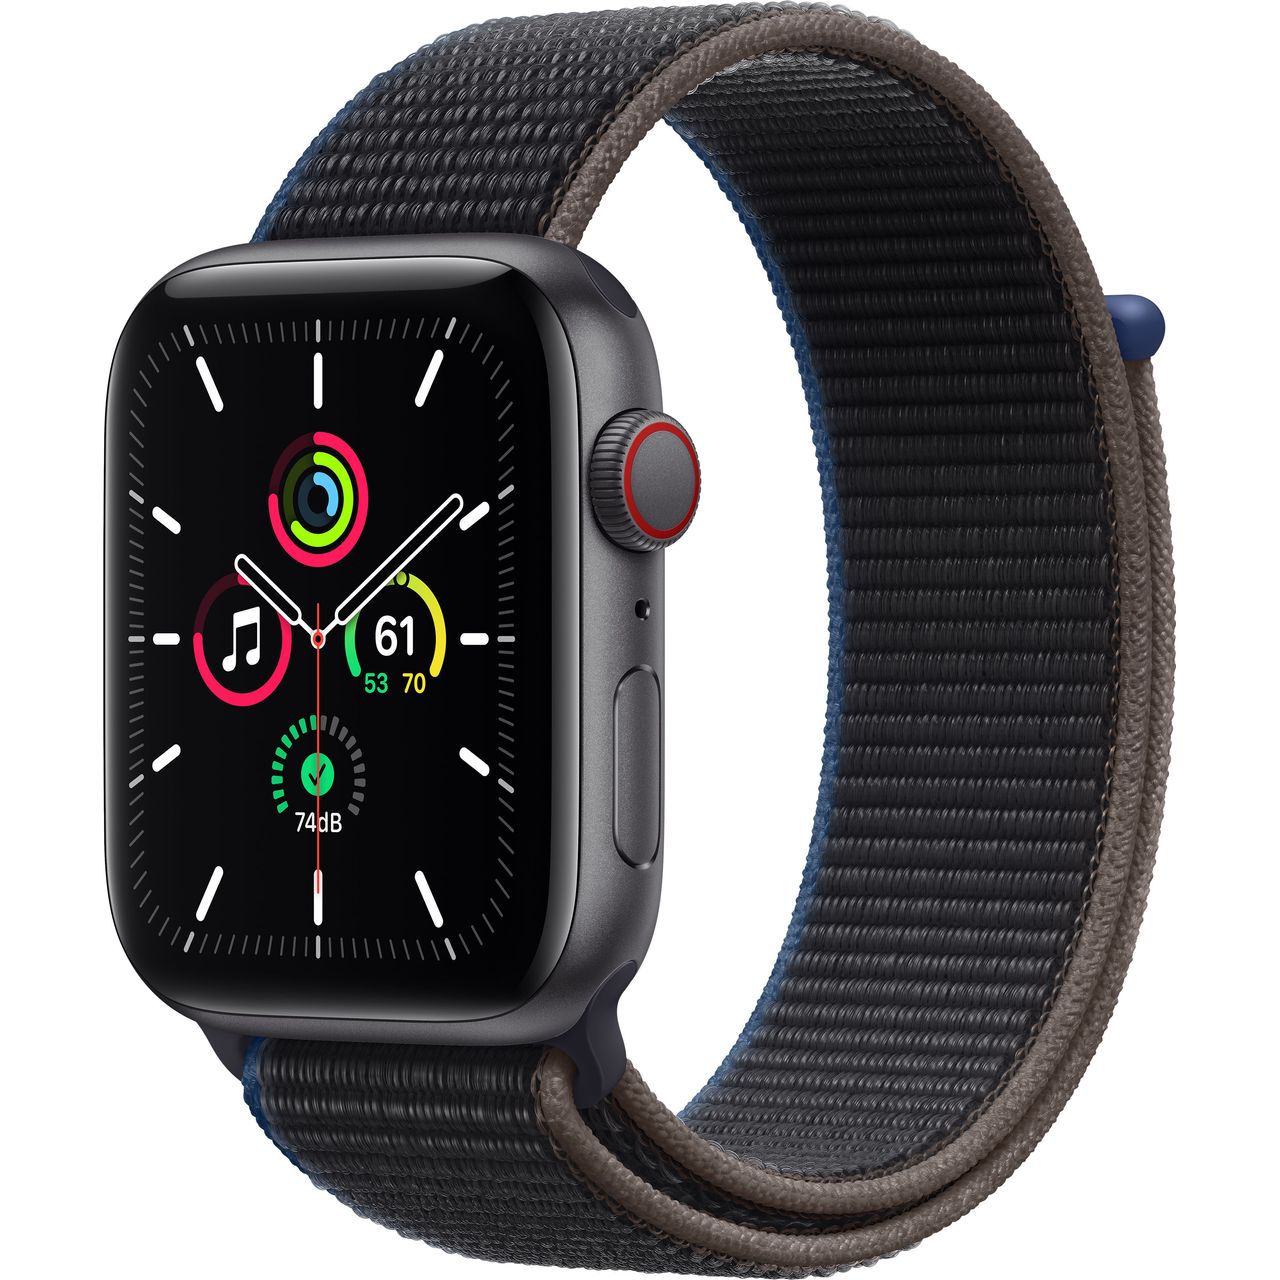 Apple Watch SE, 44mm, GPS + Cellular [2020] Review